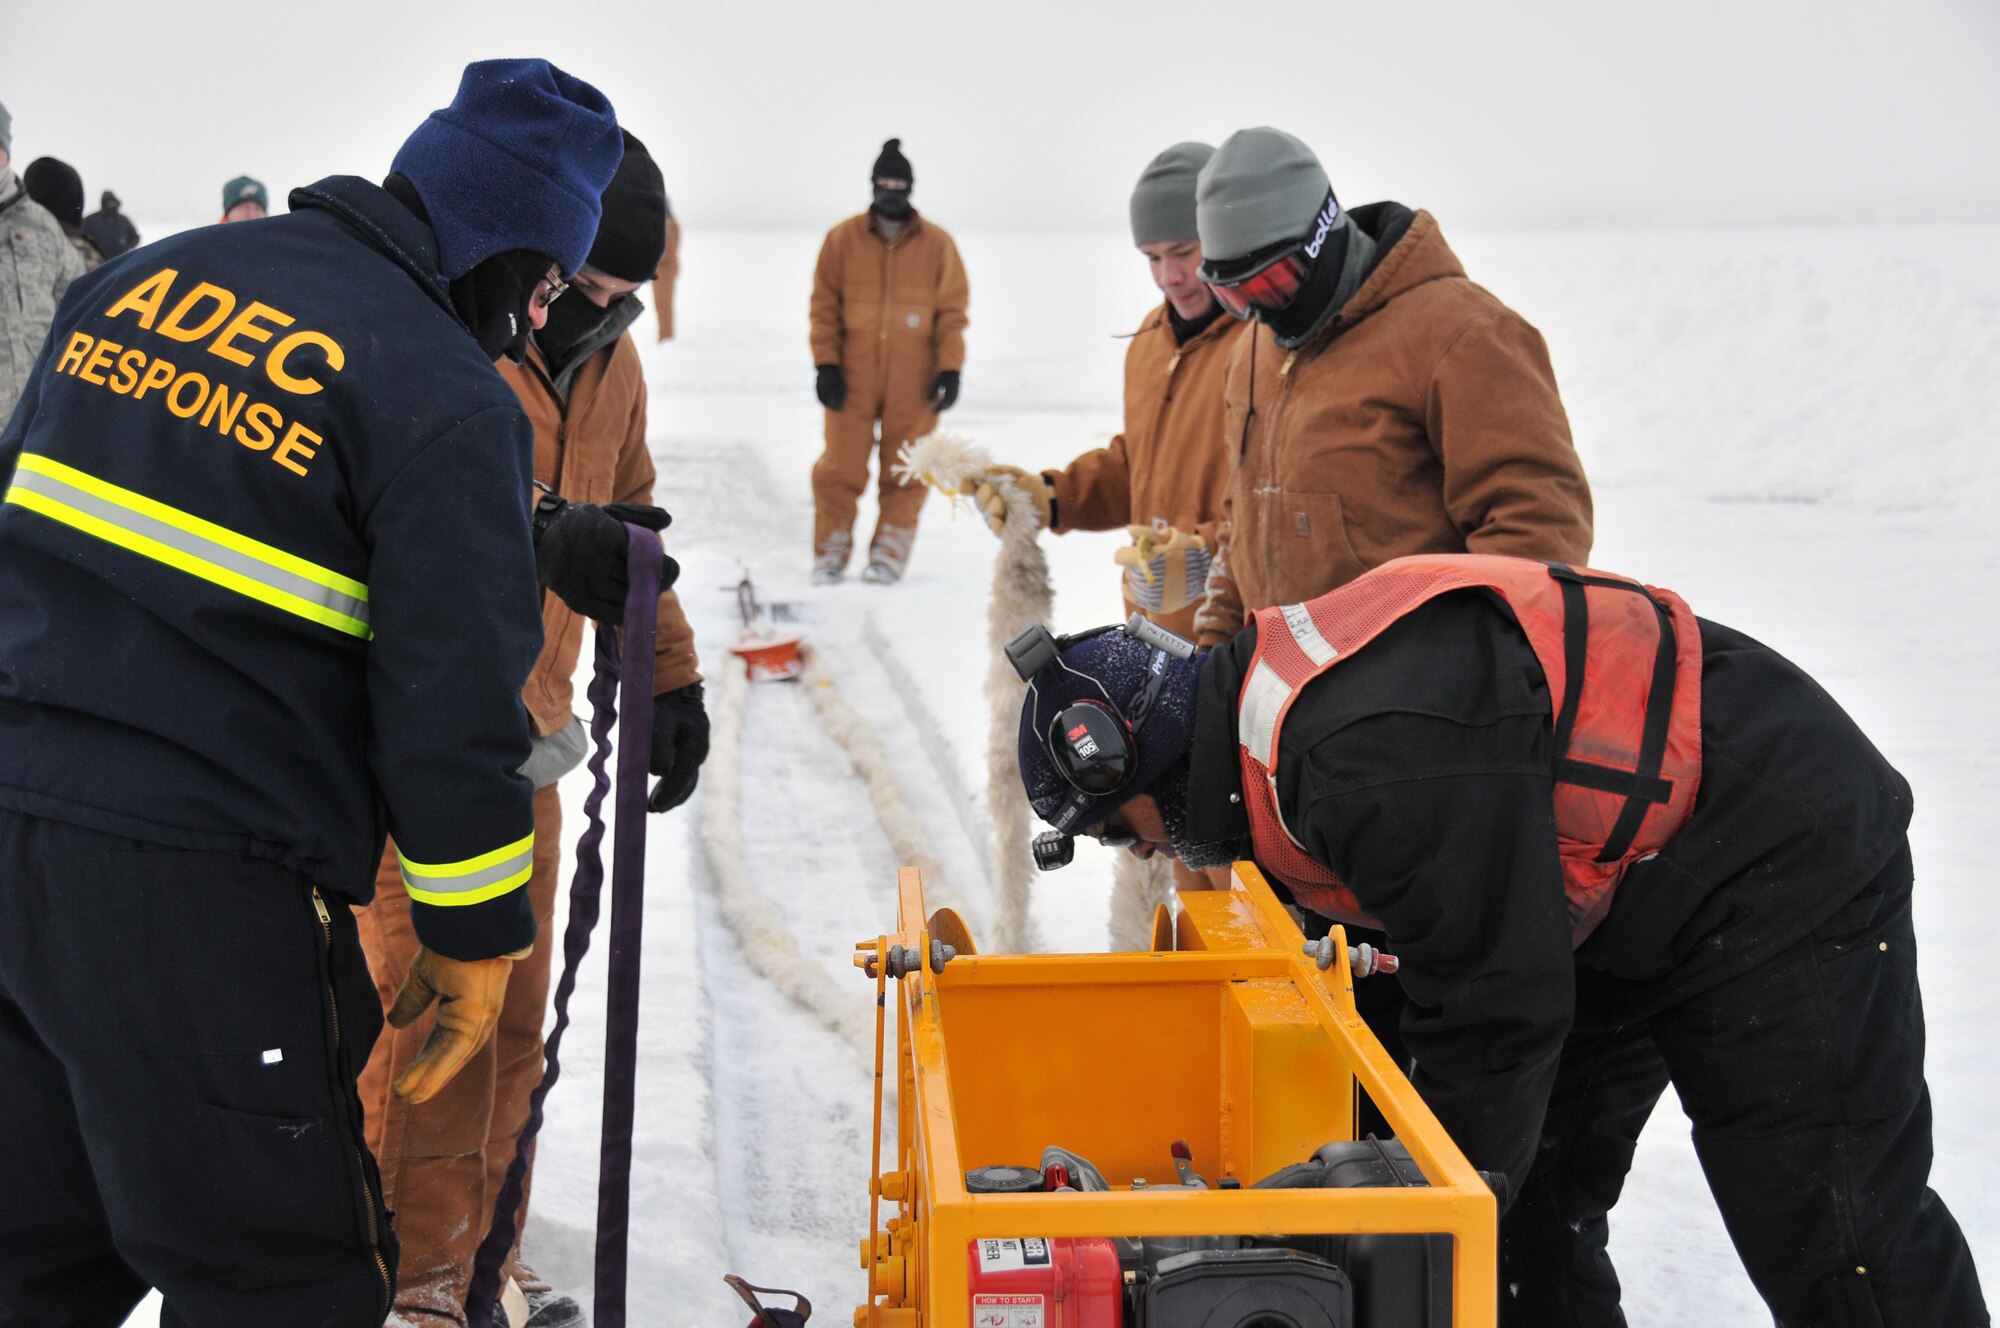 Members of the Alaska Department of Environmental Conservation, 611th Civil Engineer Squadron, and U.S. Navy Supervisor of Salvage and Diving set up the rope mop skimmer during an Arctic oil spill response exercise Feb. 4. A trench is dug a certain depth in the ice and holes are drilled to allow the oil/product to rise up into the trench to be collected. The skimmer rotates through the trench collecting the oil and sends it to a holding tank. The units participated in the exercise to learn Arctic spill response tactics and techniques. (U.S. Air Force photo/Tech. Sgt. John Gordinier)